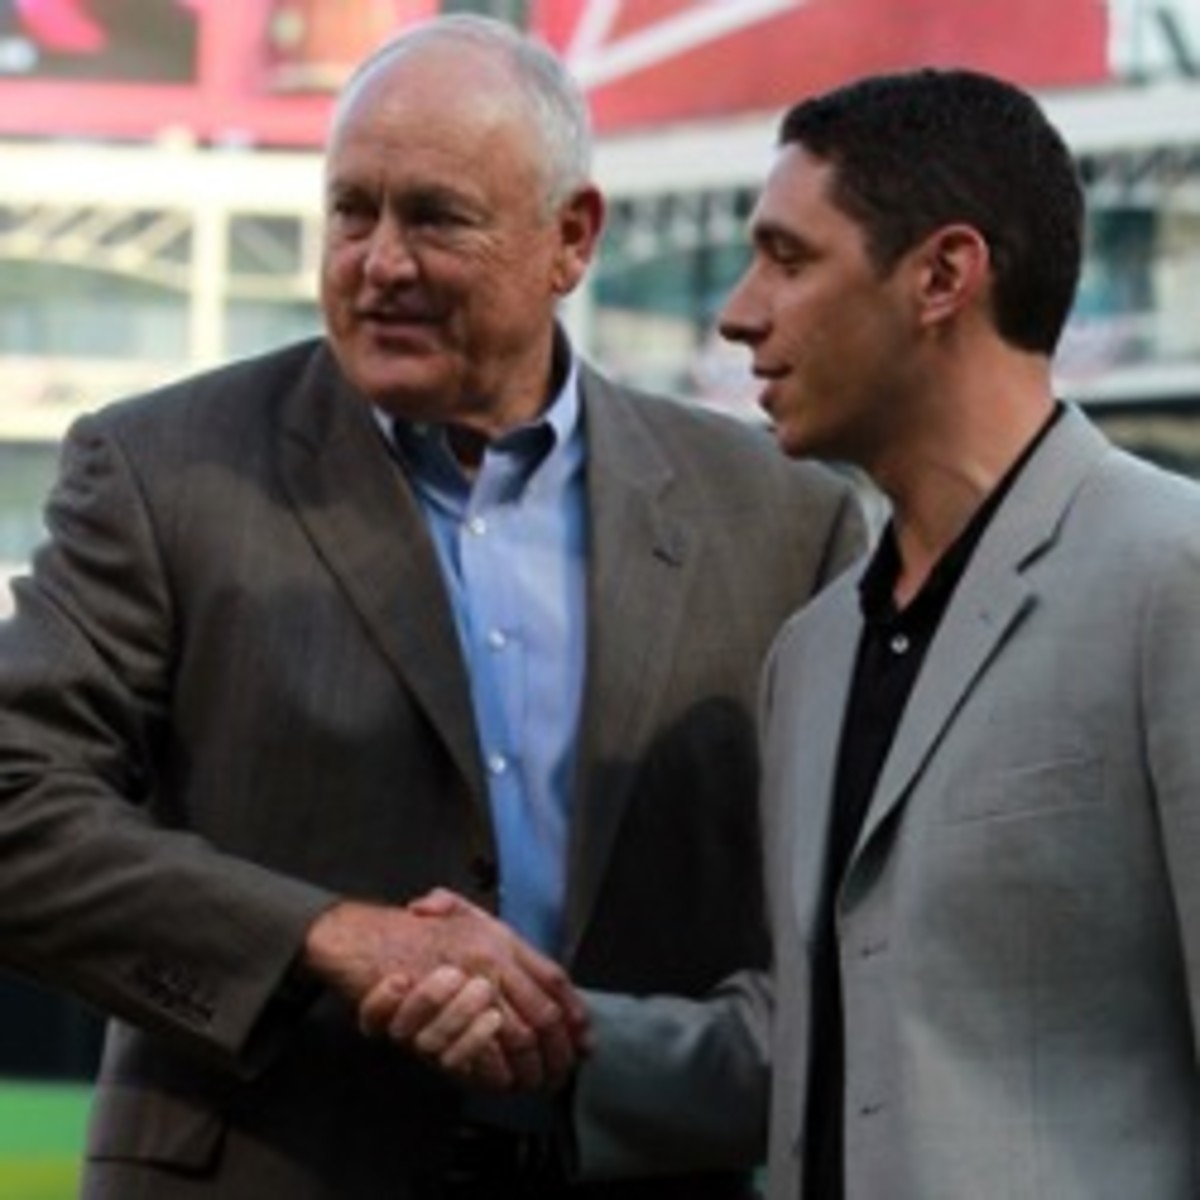 Nolan Ryan will stay on as CEO of the Texas Rangers. (Ronald Martinez/Getty Images)